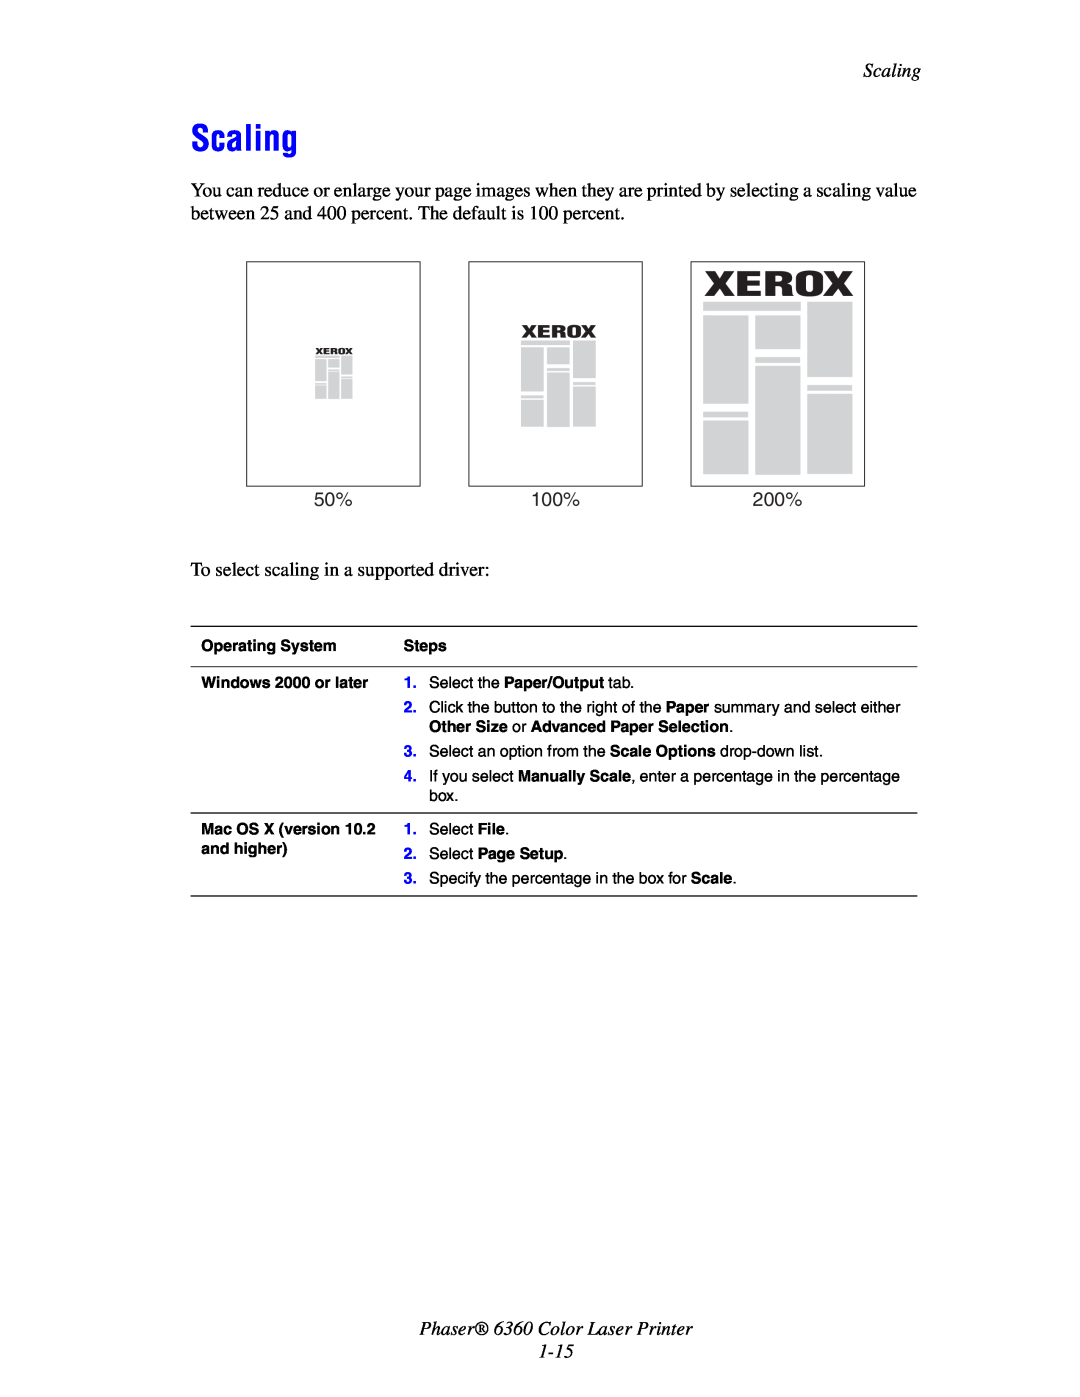 Xerox manual Scaling, 100%, 200%, Phaser 6360 Color Laser Printer 1-15, Operating System, Steps, Windows 2000 or later 